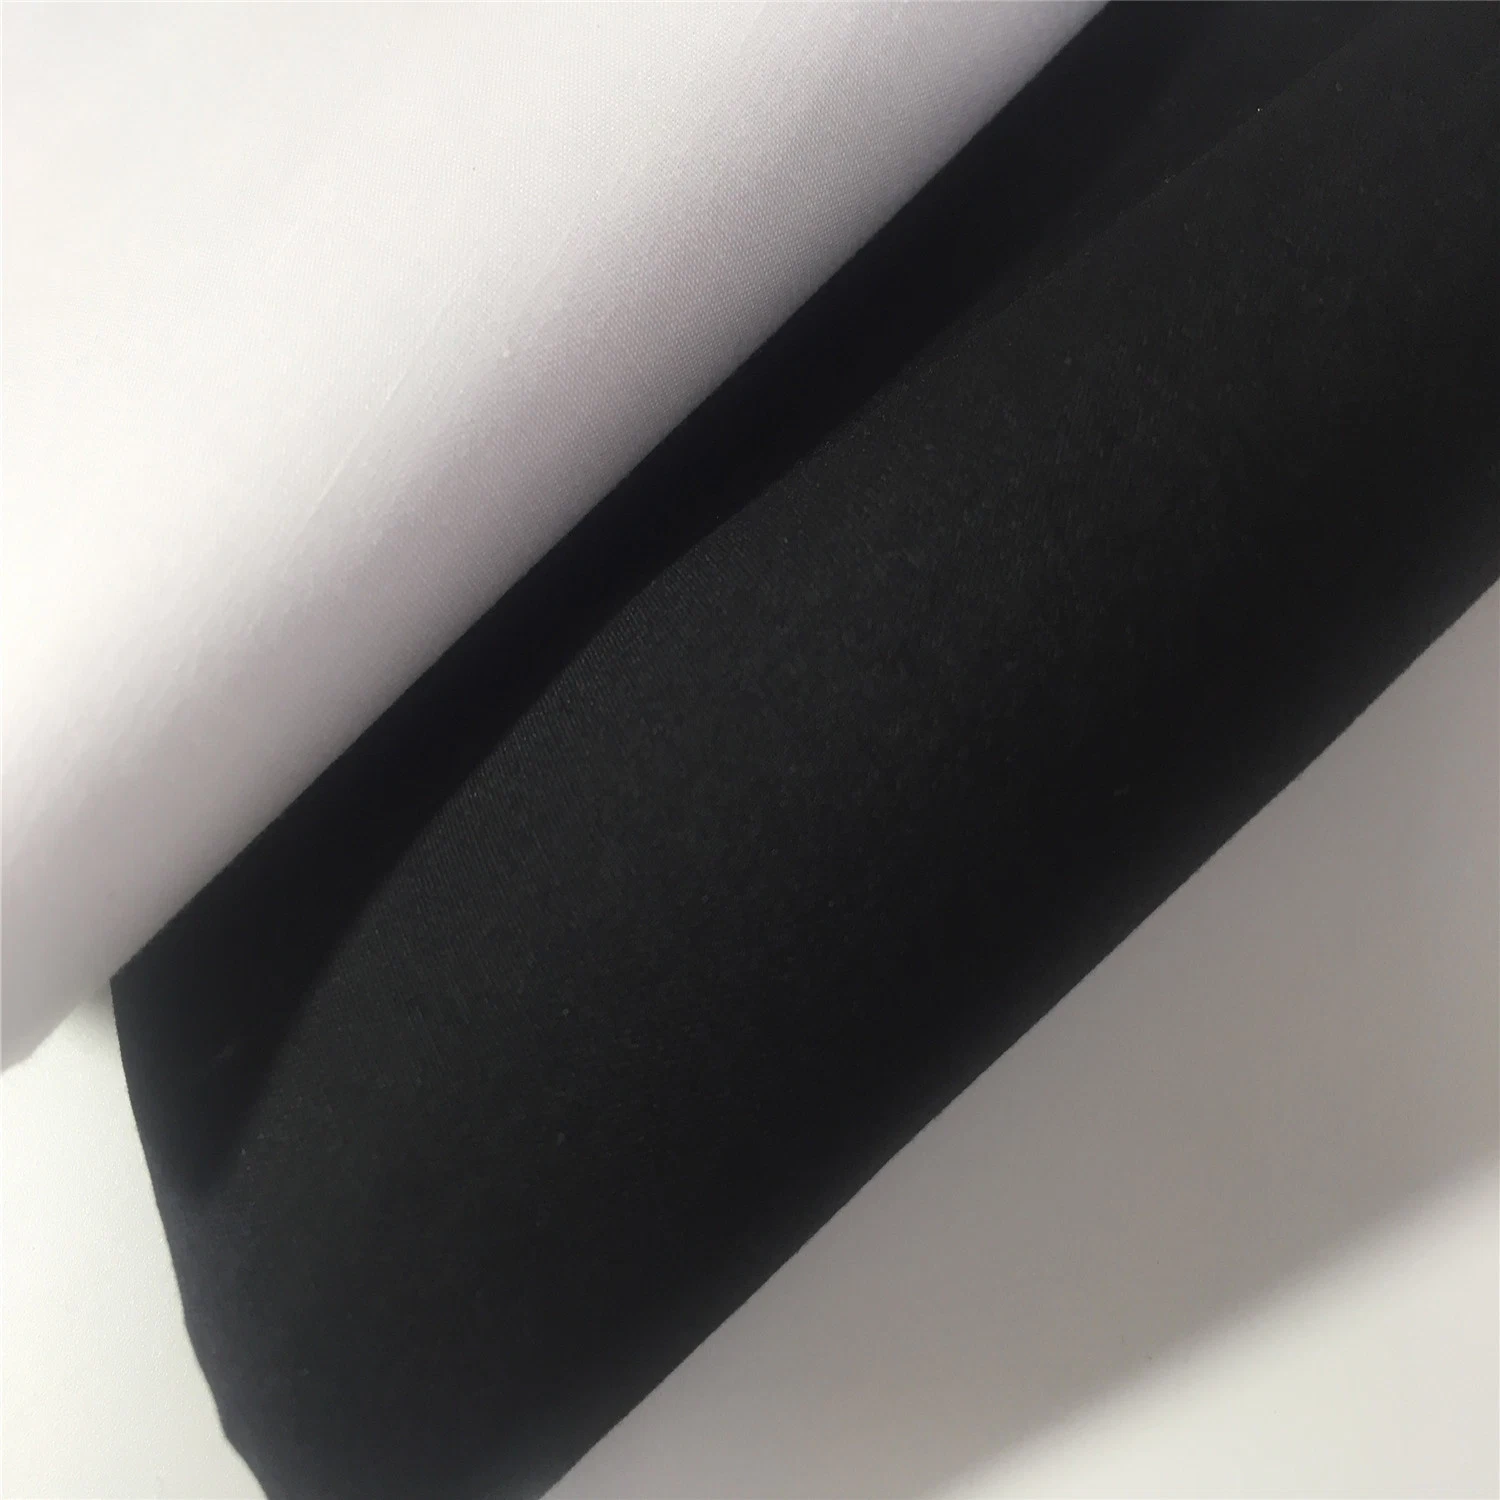 T/C80/20 45X45 110X76 150cm 100GSM Shuttle Airjet Woven Plain Type Pfp Bleaching White Continues Dyeing Lot Dyeing All Colors Black Pocket Fabric